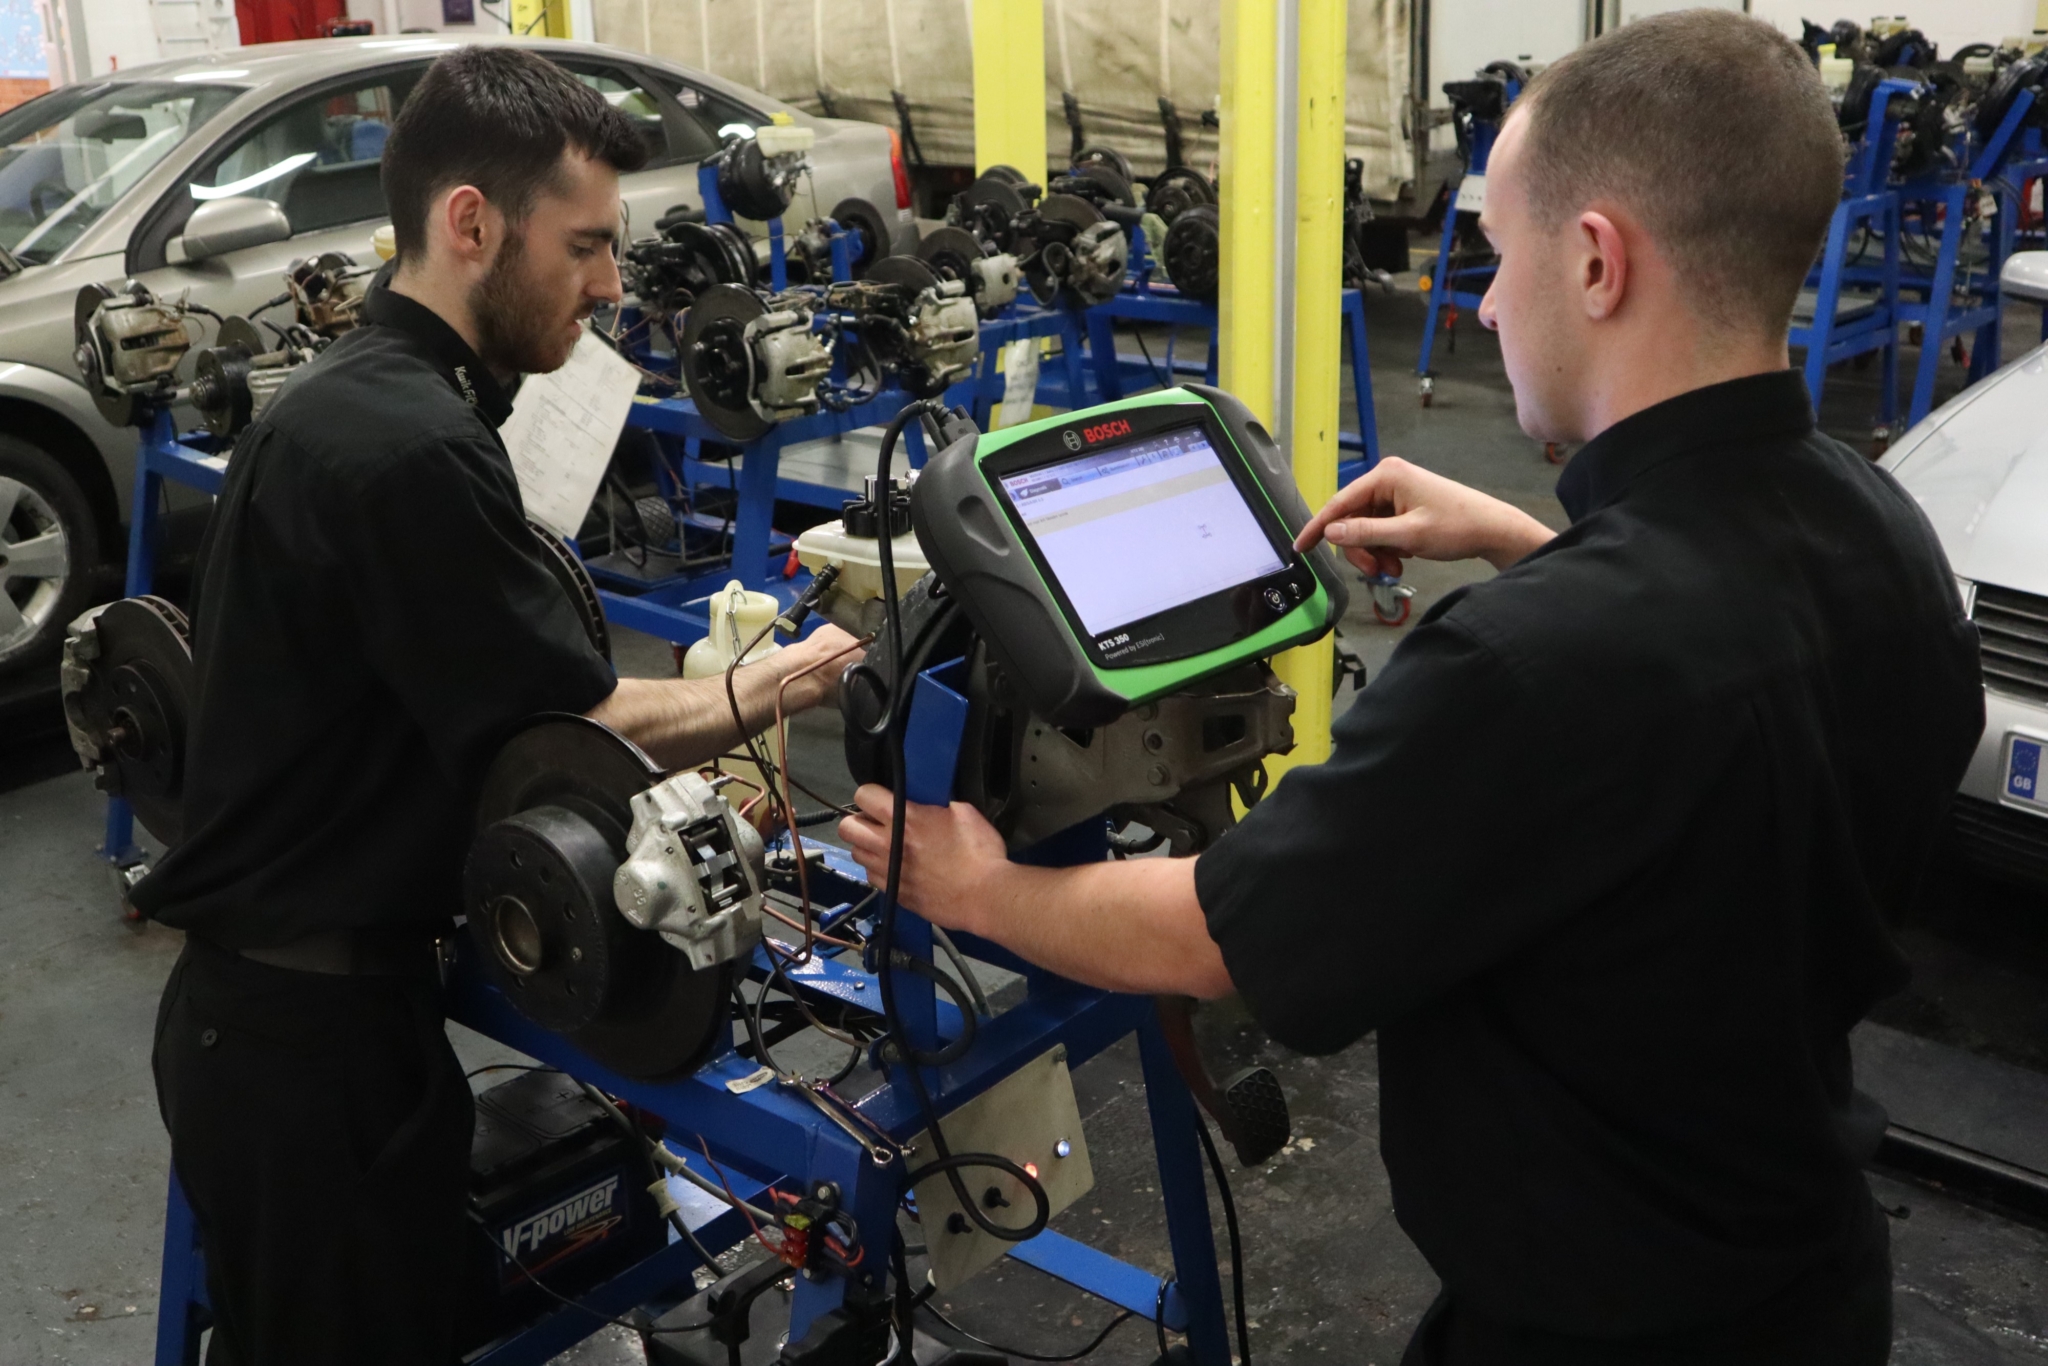 Kwik Fit to recruit 300 new apprentices